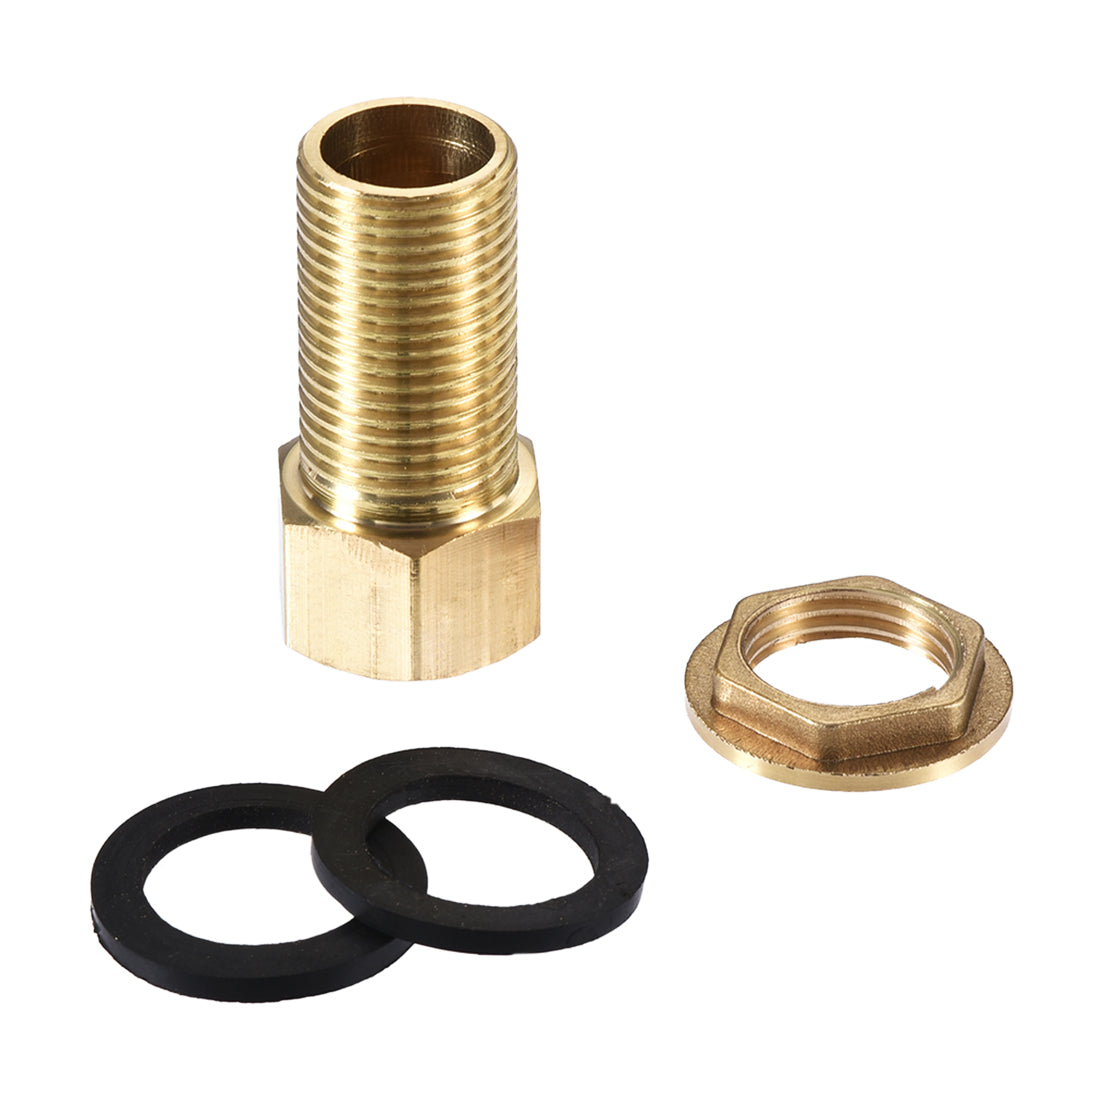 uxcell Uxcell Bulkhead Fitting, G1/2 Male 0.75" Female, Hex Tube Adaptor Hose Fitting, with Silicone Gaskets, for Water Tanks, Brass, Gold Tone, Pack of 2